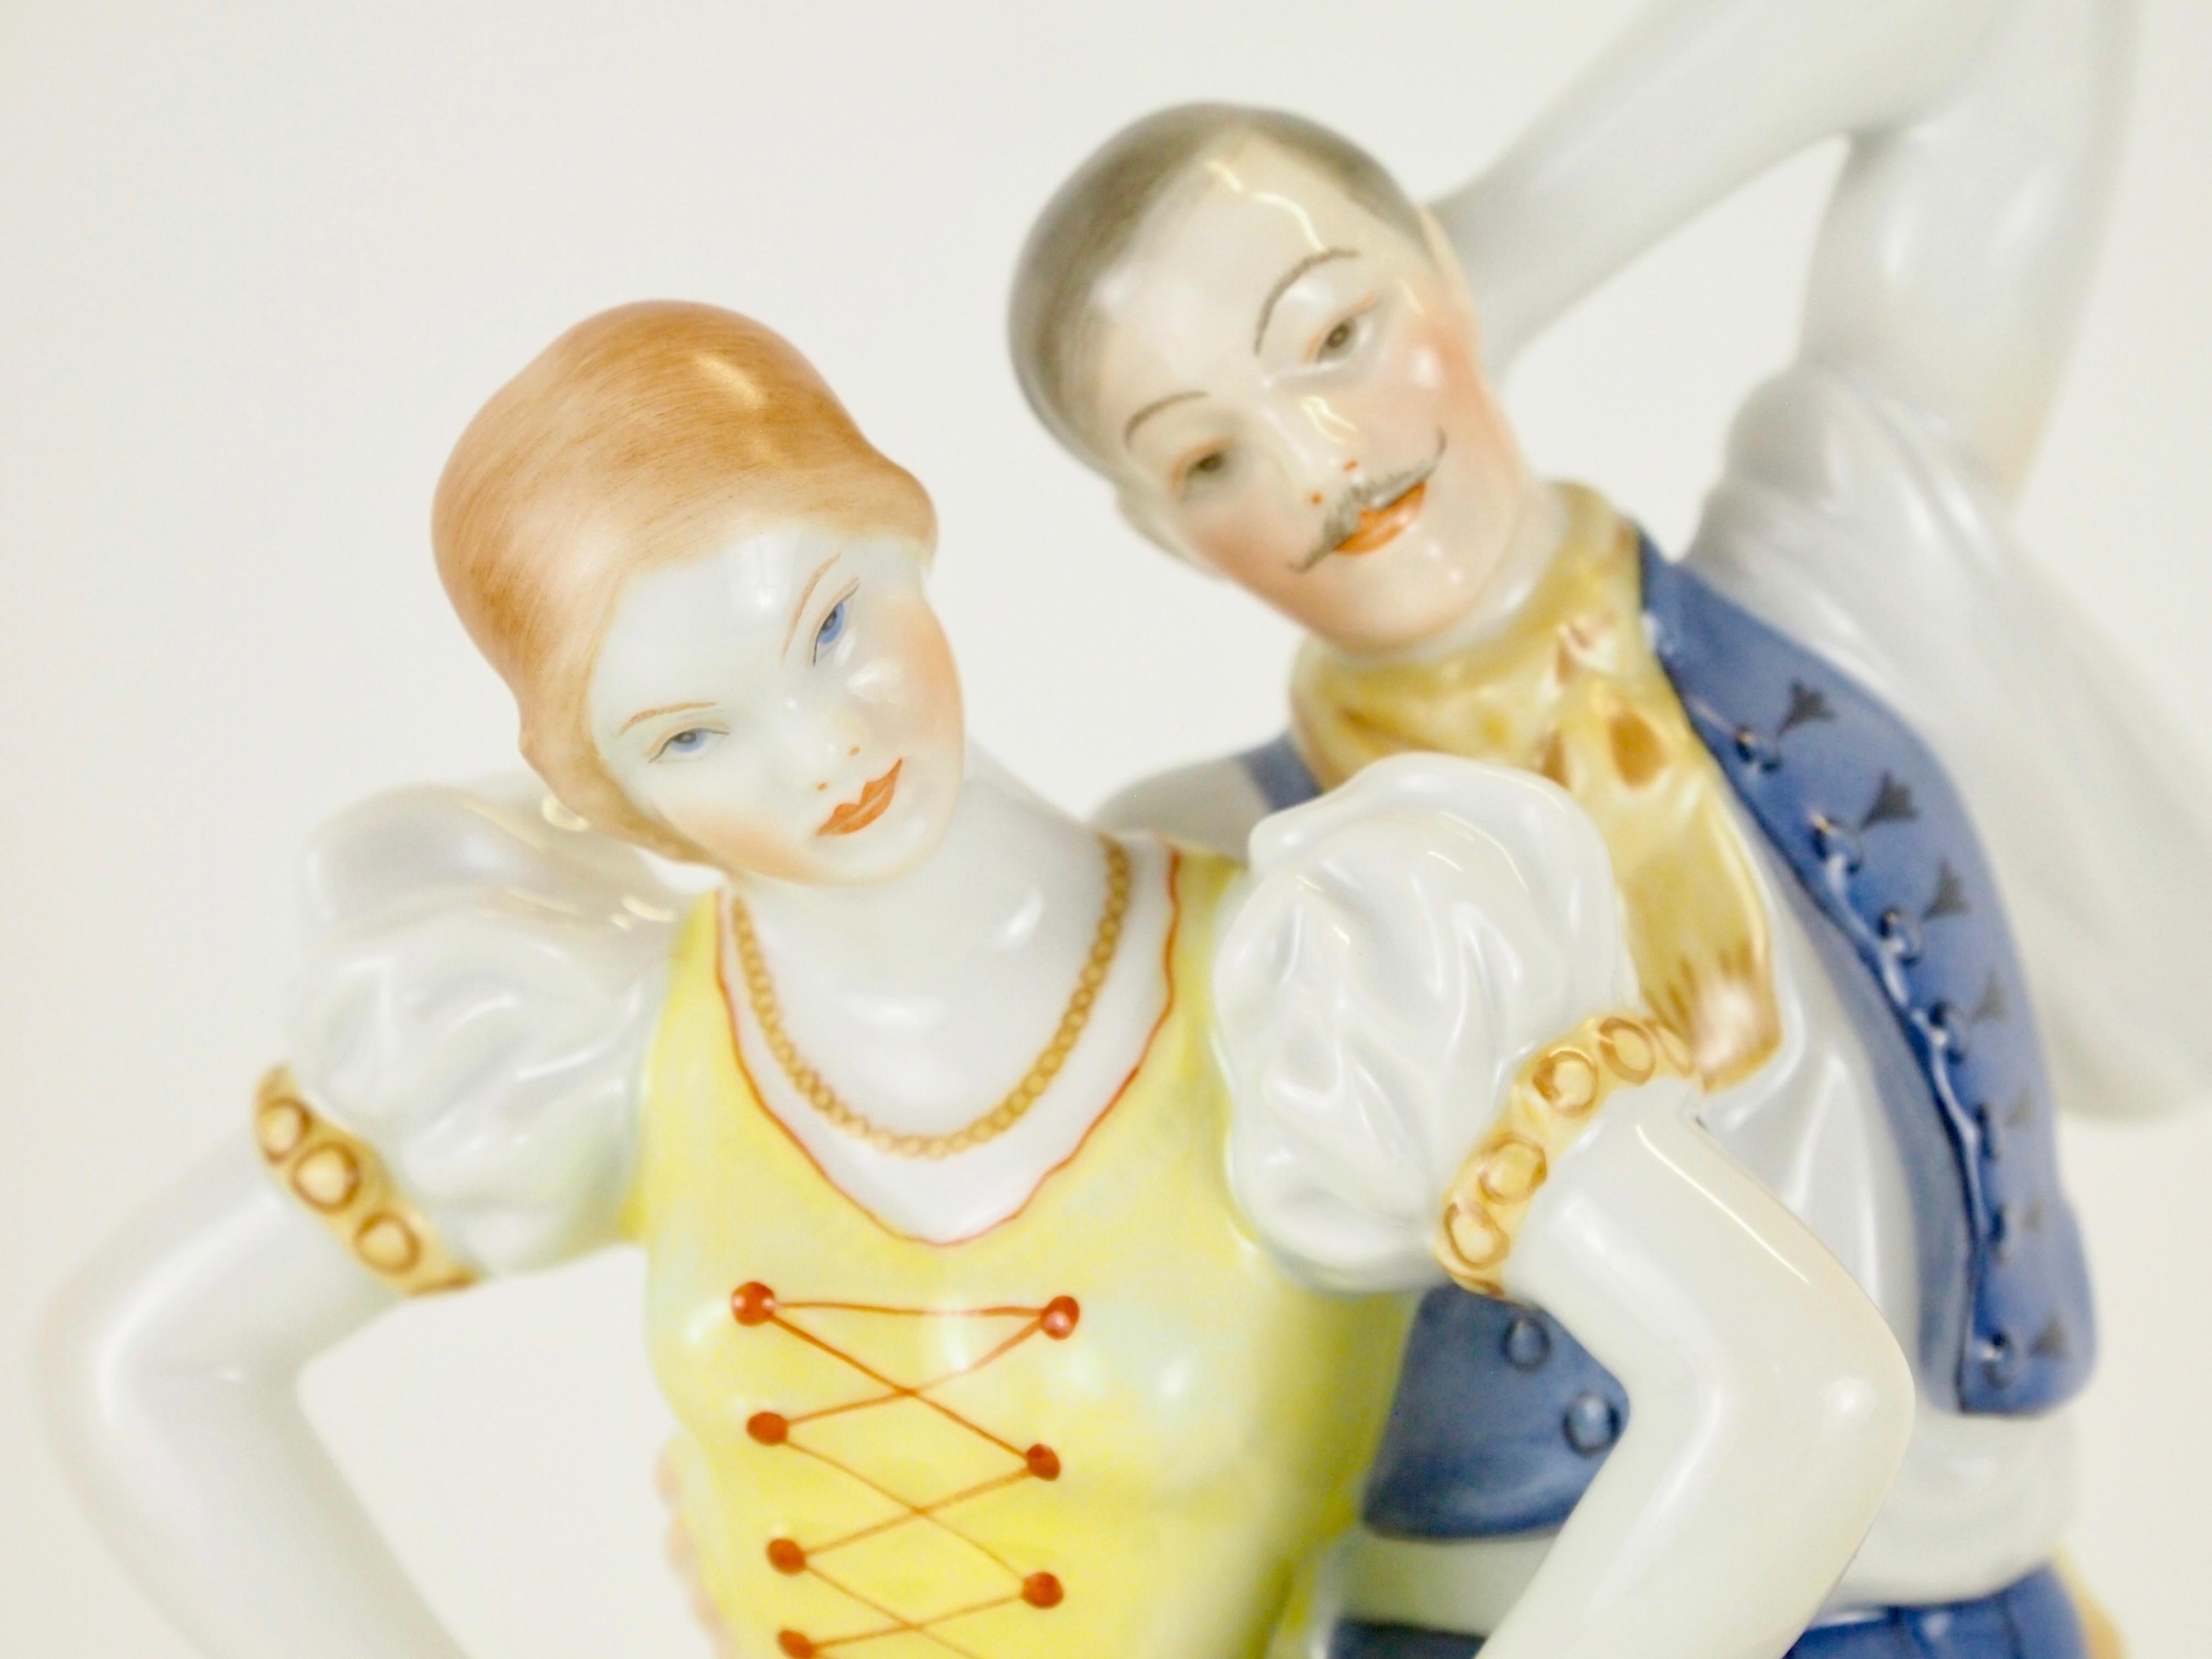 Dancing Couple Porcelain Figurine by Herend Hungary In Good Condition For Sale In Hilversum, Noord Holland